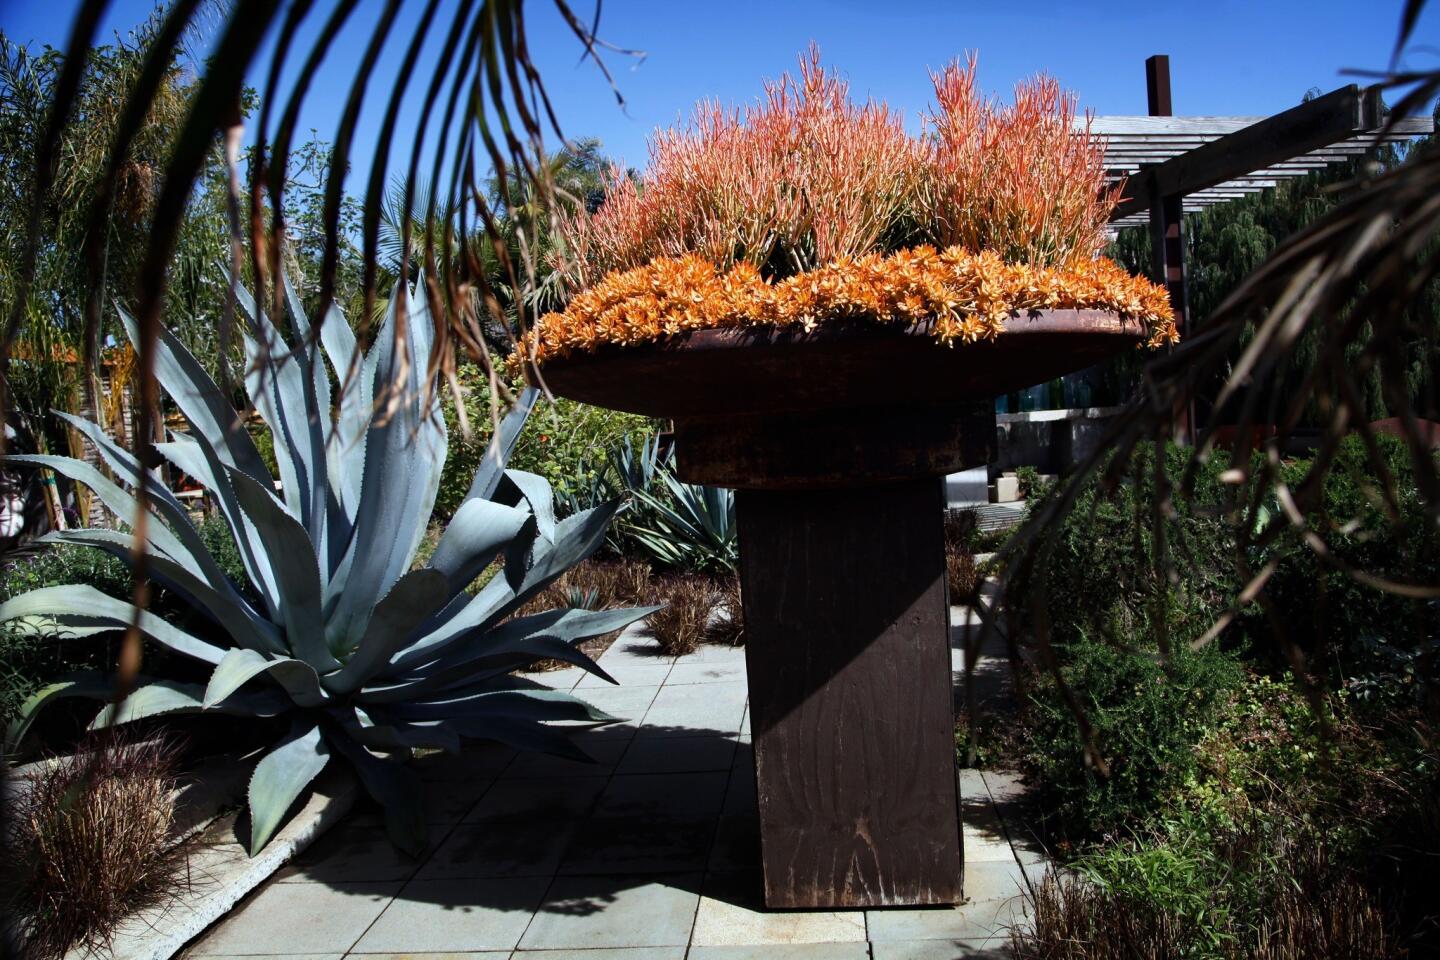 Among the designer's moves: turning an old water fountain into a planter. The pedestal and saucer are now a dramatic focal element, planted with red pencil tree (a cultivar of Euphorbia tirucalli called Sticks on Fire) and cascading clumps of copper-tone stonecrop (Sedum nussbaumerianum).